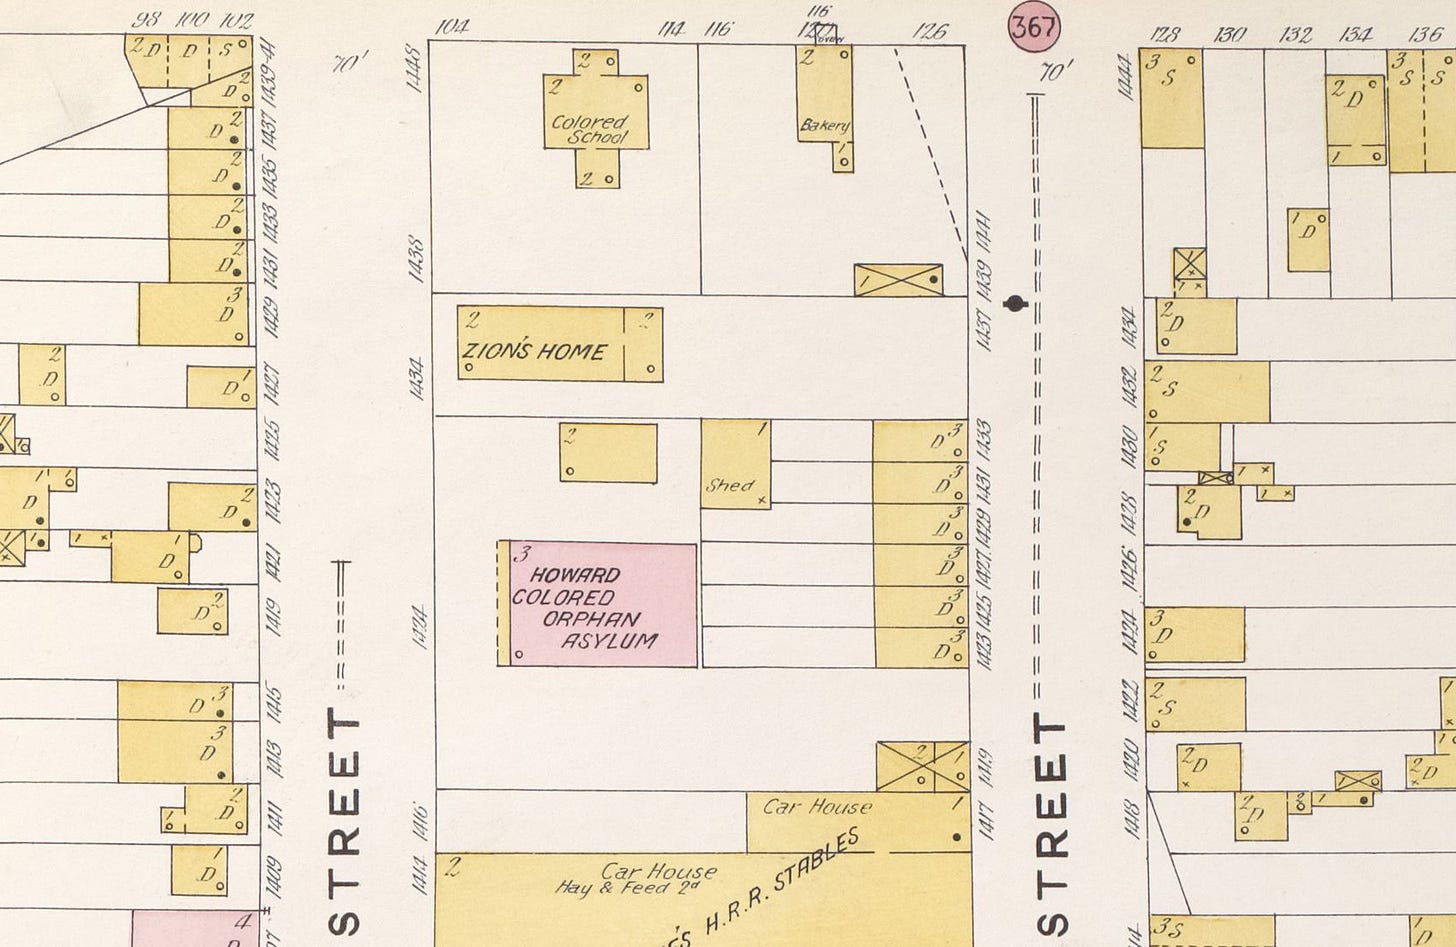 map showing a wood frame building labeled zion's home